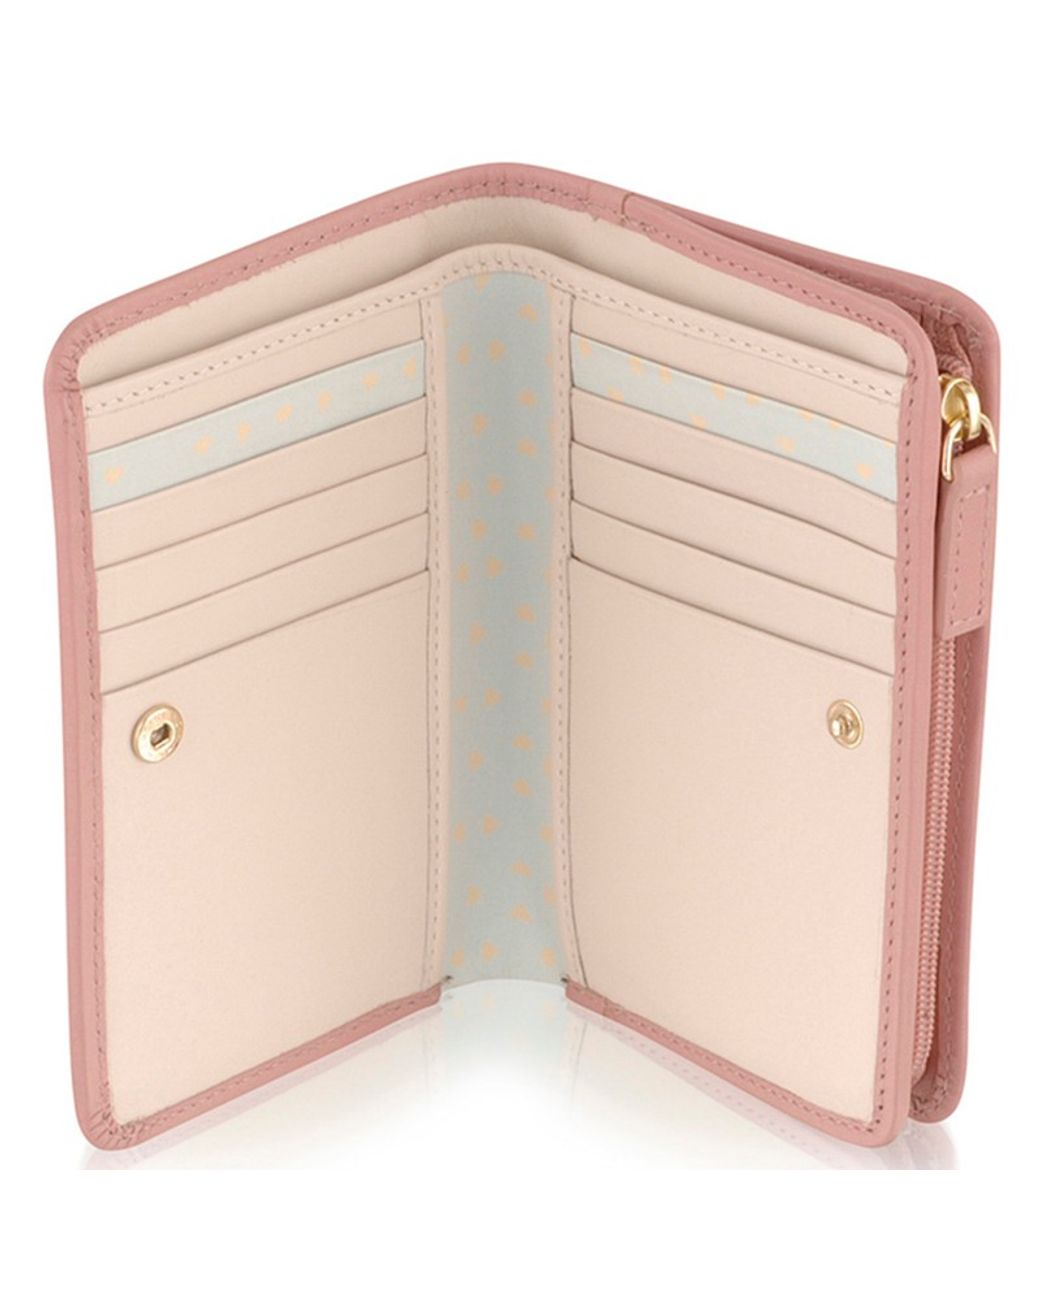 Radley London Leather Love Potion Large Flapover Matinee Purse Wallet in  Light Pink : Amazon.co.uk: Fashion